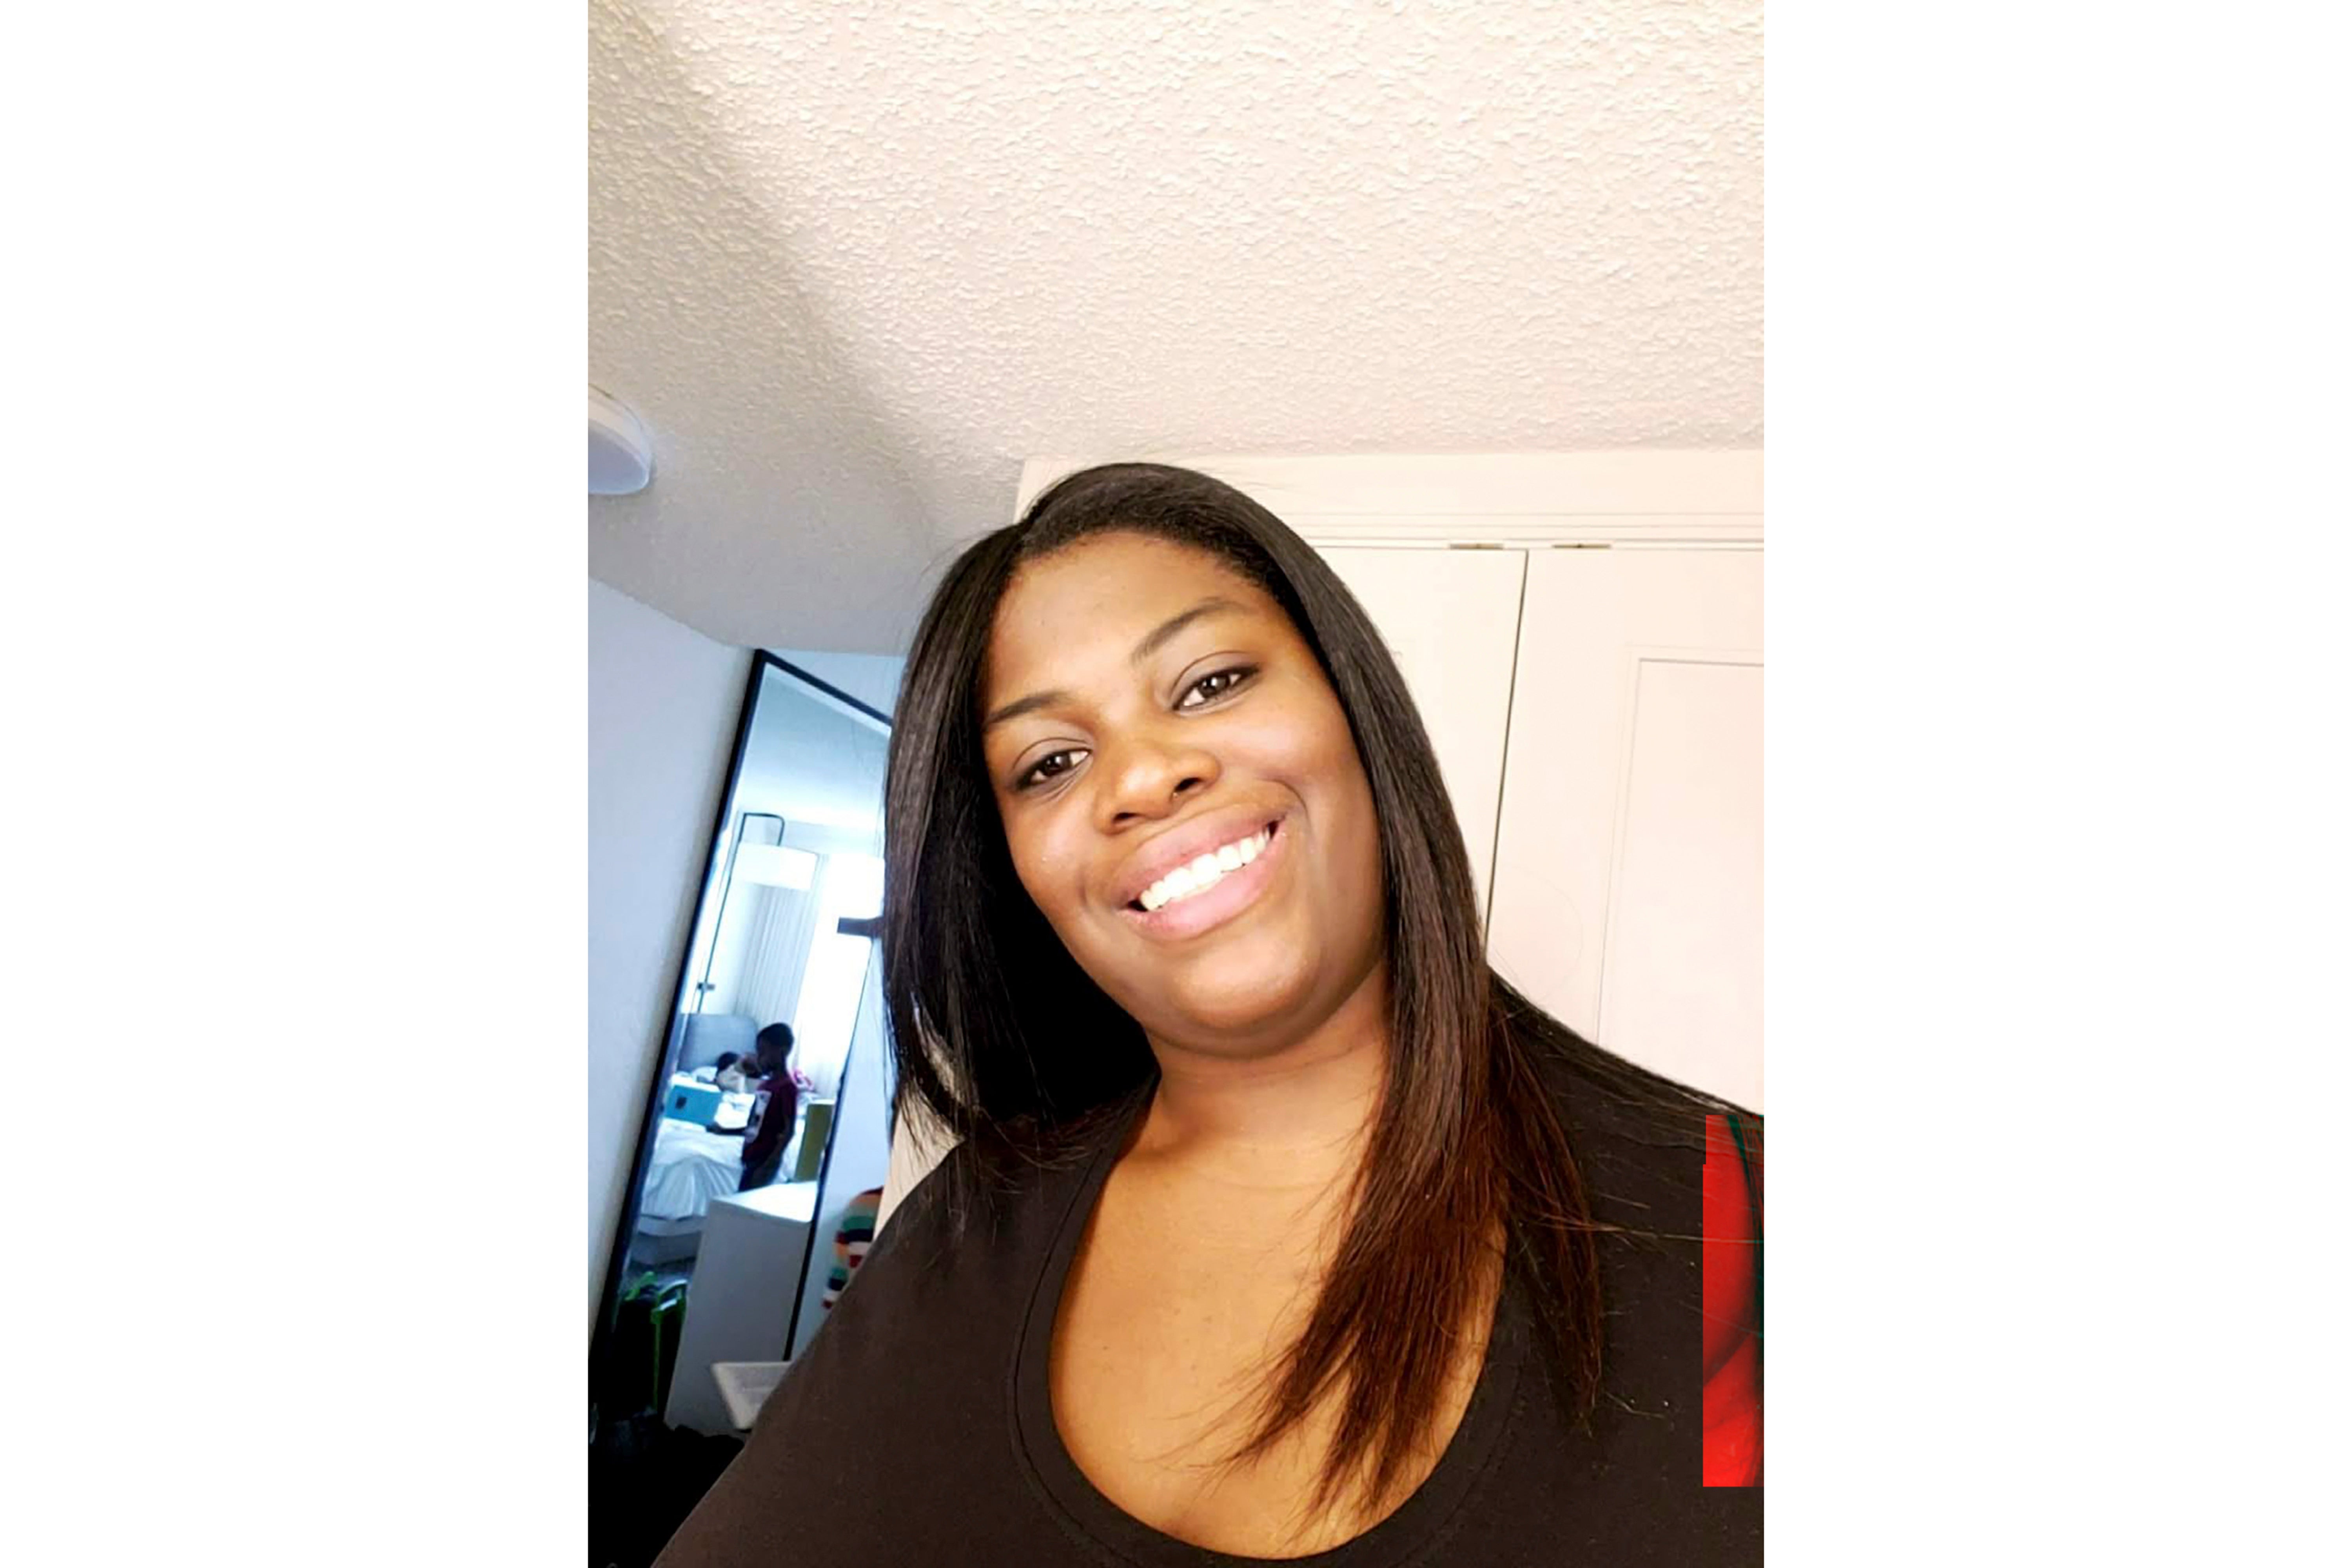 Ajike Owens, a 35-year-old mother of four from Ocala, Florida